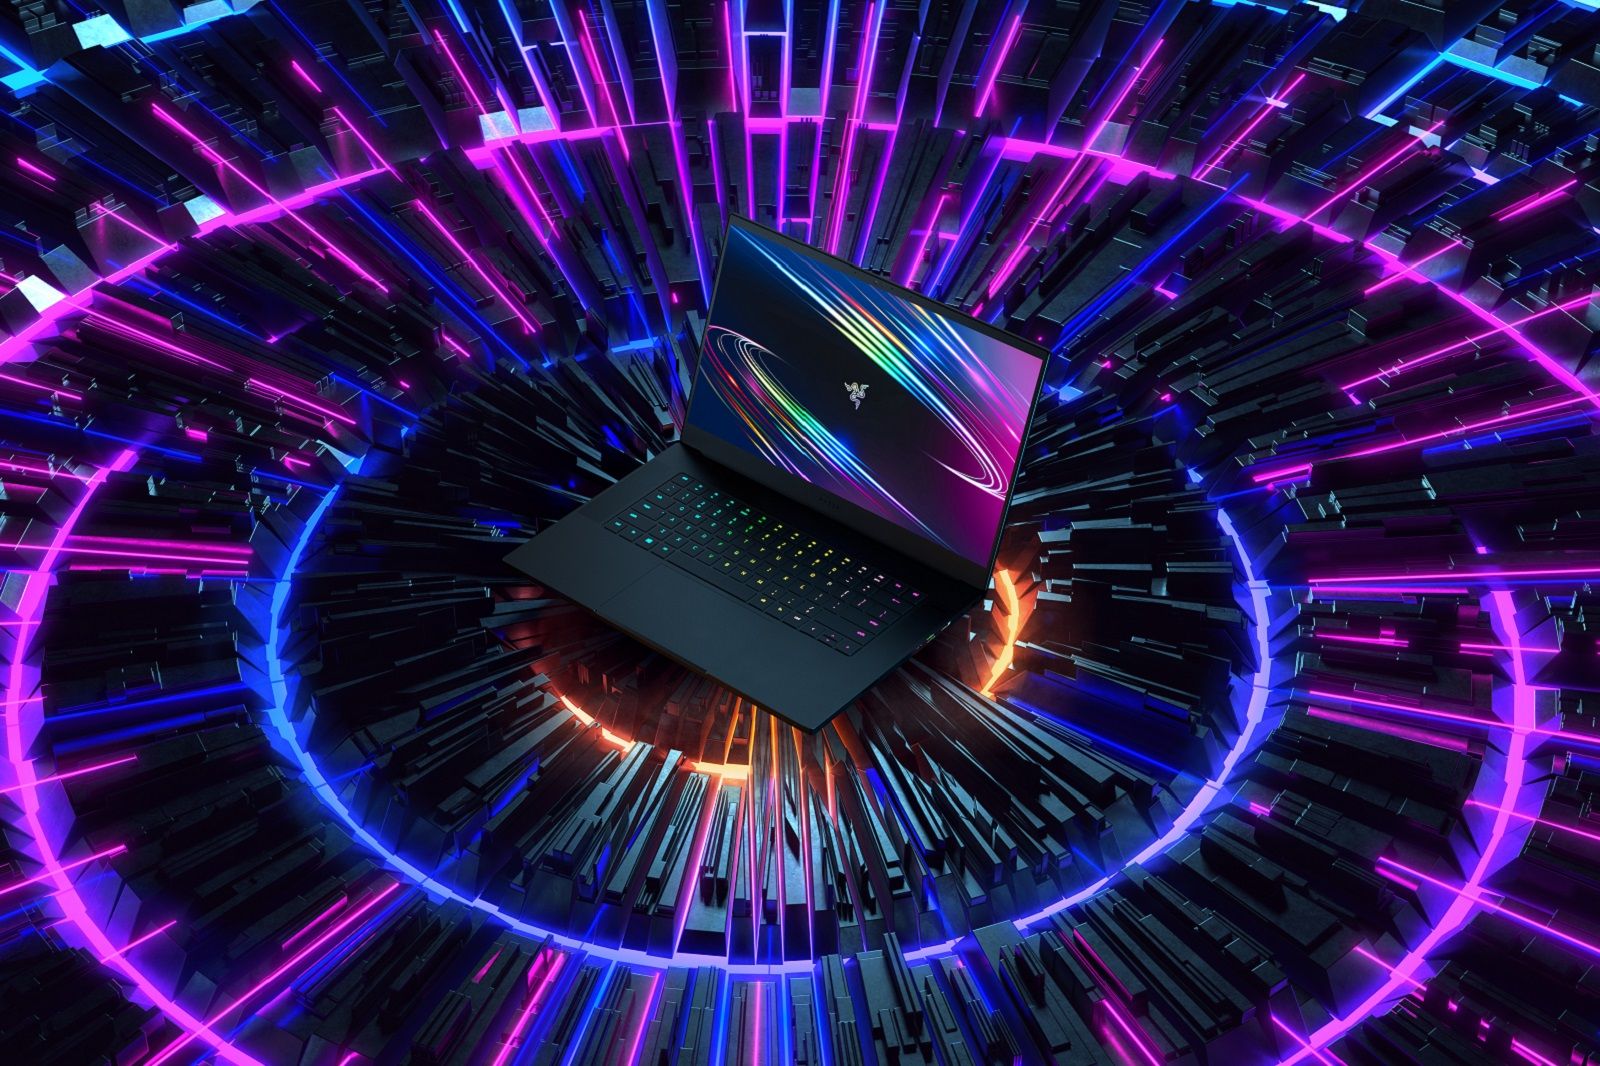 Razer Blade 15 set to feature 10th Gen Intel CPU Nvidia super graphics and 300Hz display image 1